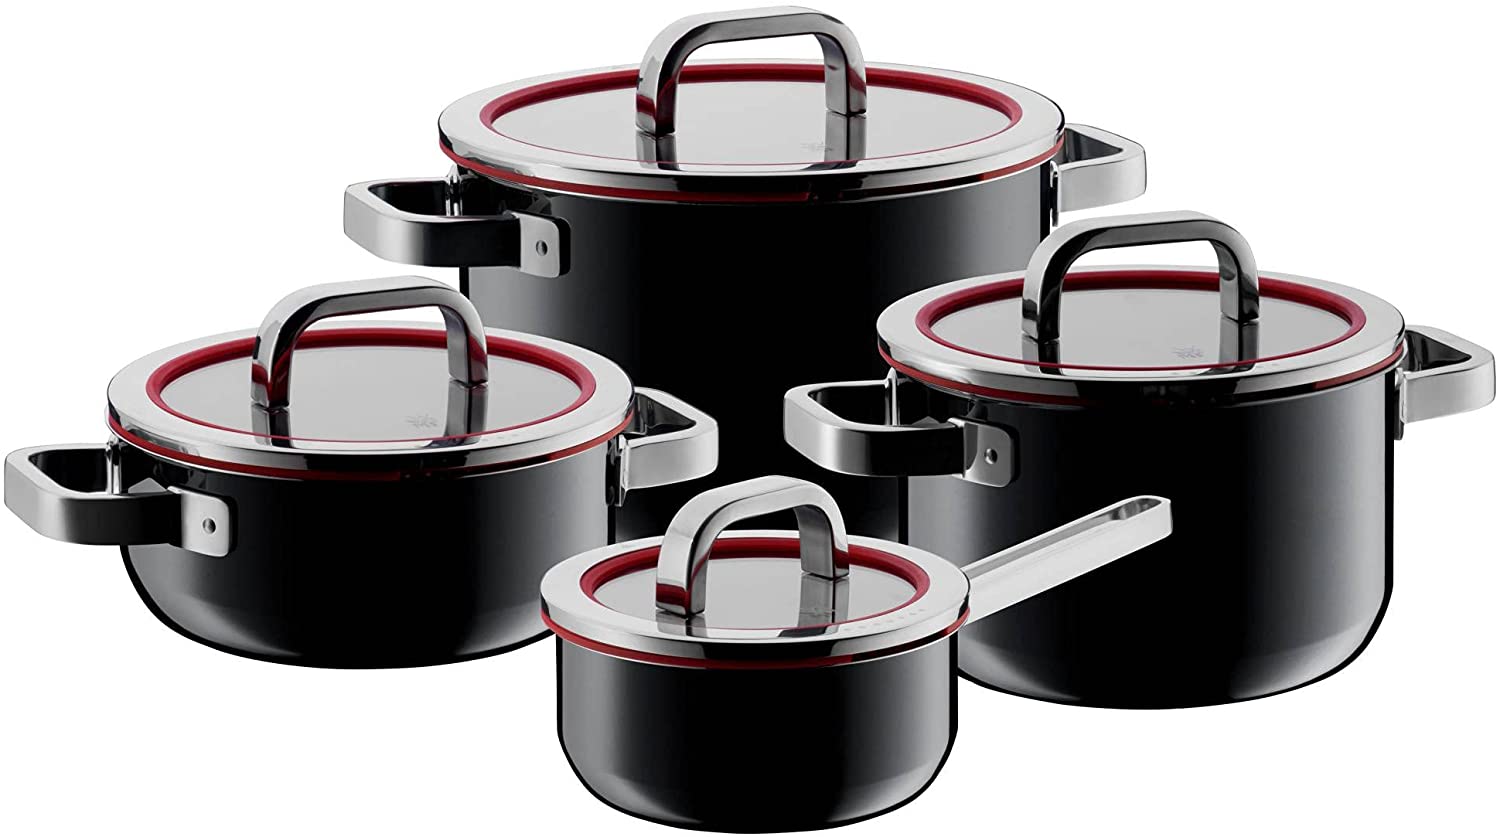 WMF Fusion 4-Piece Saucepan Set with Lid Stainless Steel Silicone Rim with Pouring Function in Black